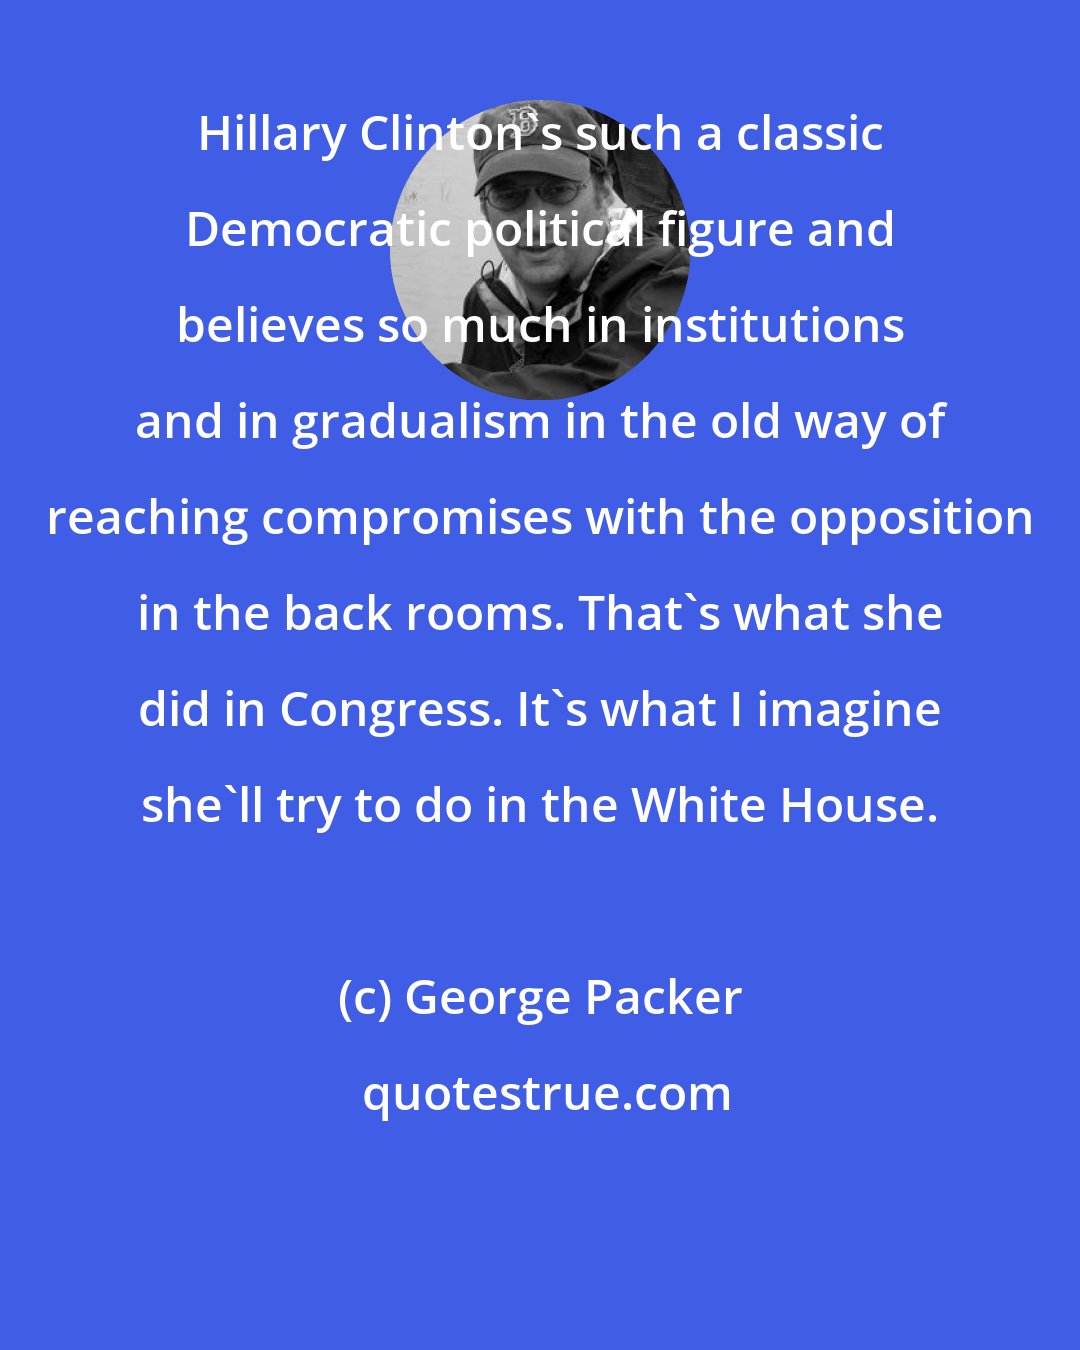 George Packer: Hillary Clinton's such a classic Democratic political figure and believes so much in institutions and in gradualism in the old way of reaching compromises with the opposition in the back rooms. That's what she did in Congress. It's what I imagine she'll try to do in the White House.